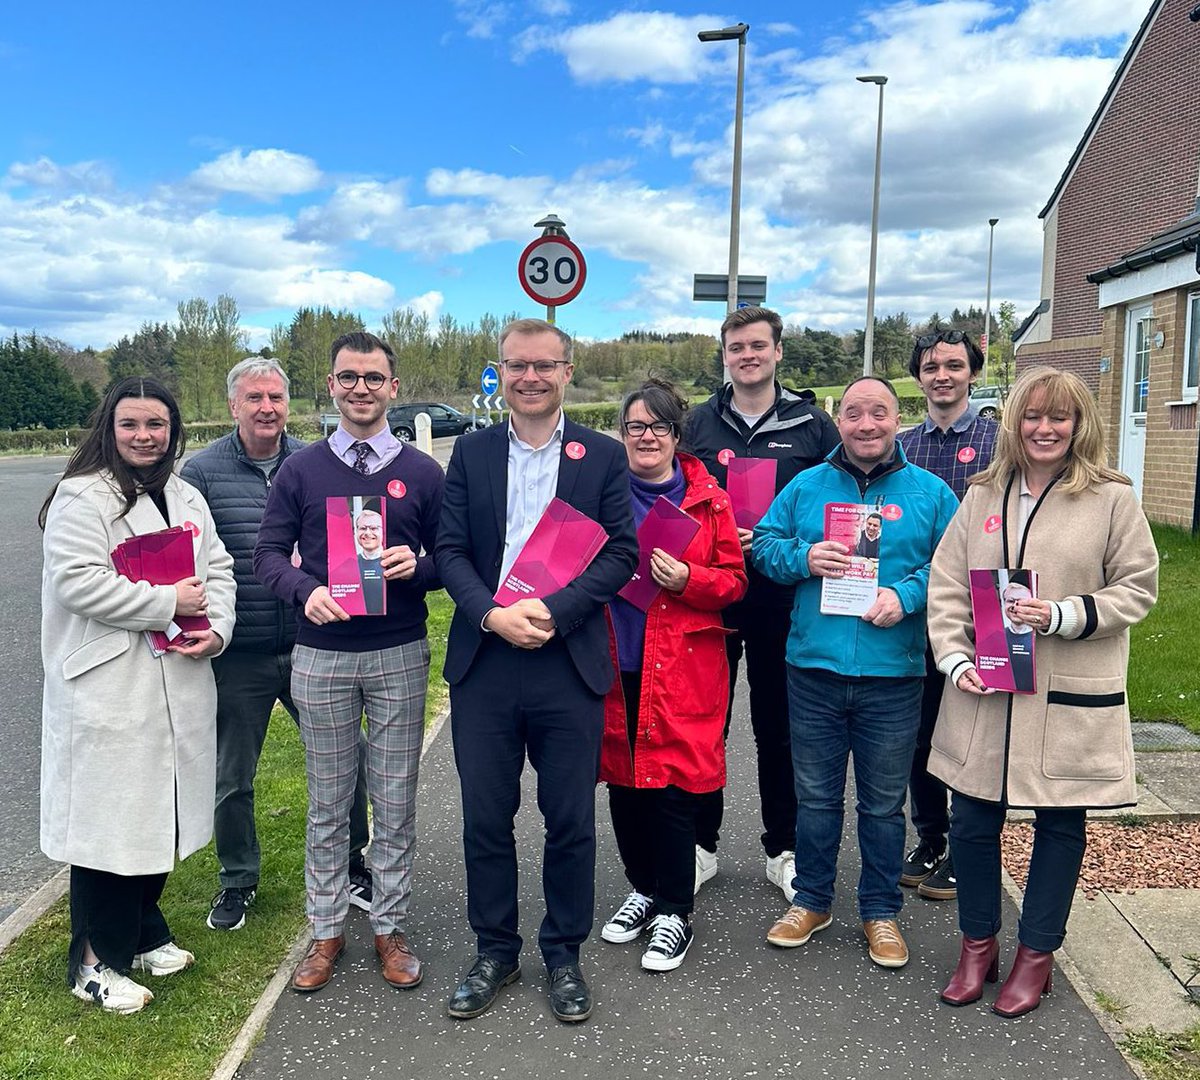 Spring has finally sprung and support for @ScottishLabour is blossoming.🌺 People in Cambuslang are finished with years of SNP and Tory maladministration - they’re ready to vote for a Labour government with Scotland at its heart! 🌹💪🏴󠁧󠁢󠁳󠁣󠁴󠁿